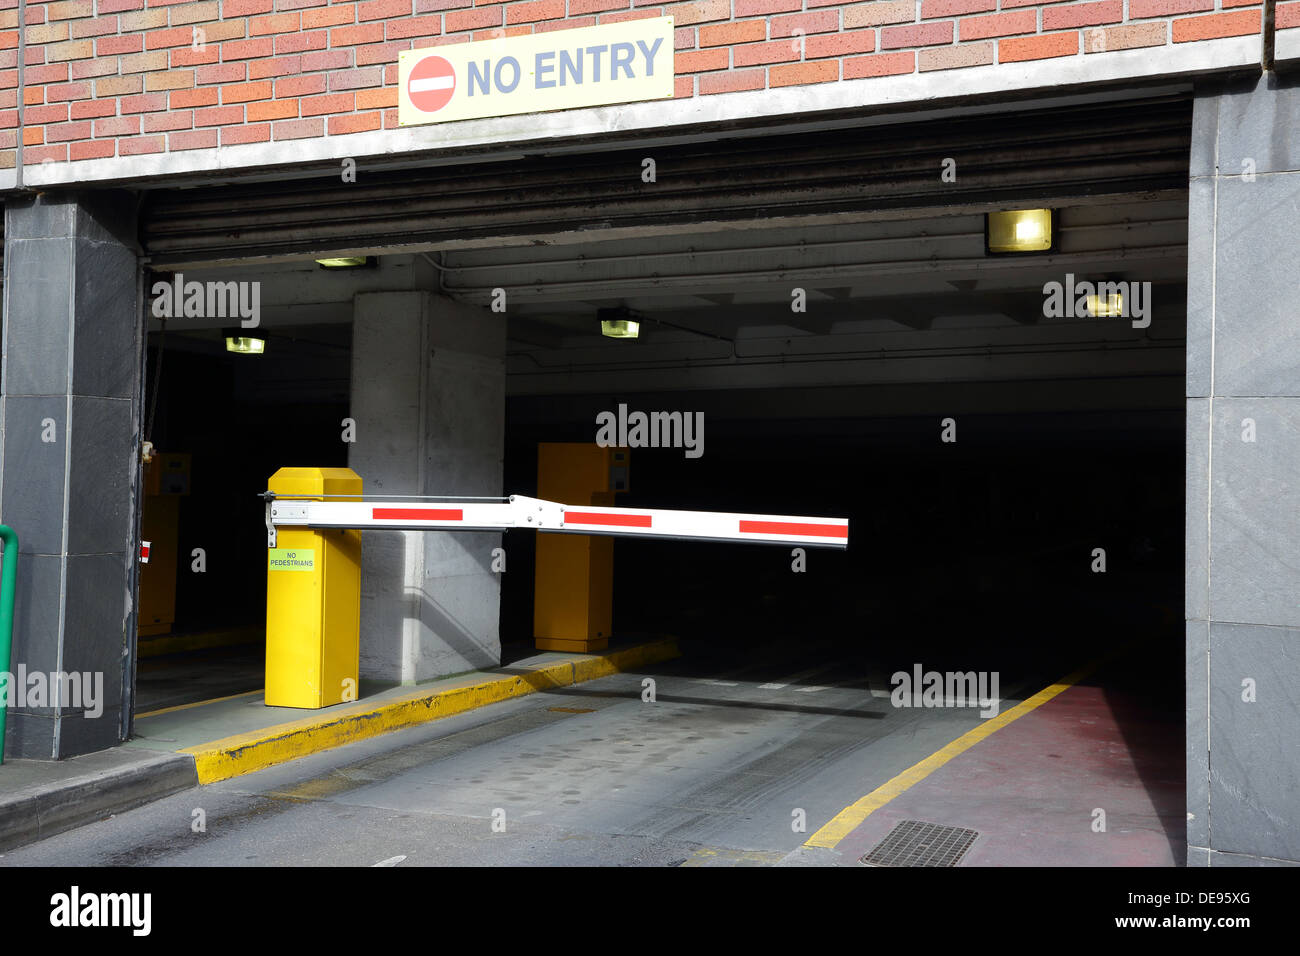 Car Main Entrance and Welcome Sign for Universal Orlando Resort Parking  Garage Editorial Photography - Image of business, architecture: 203589987